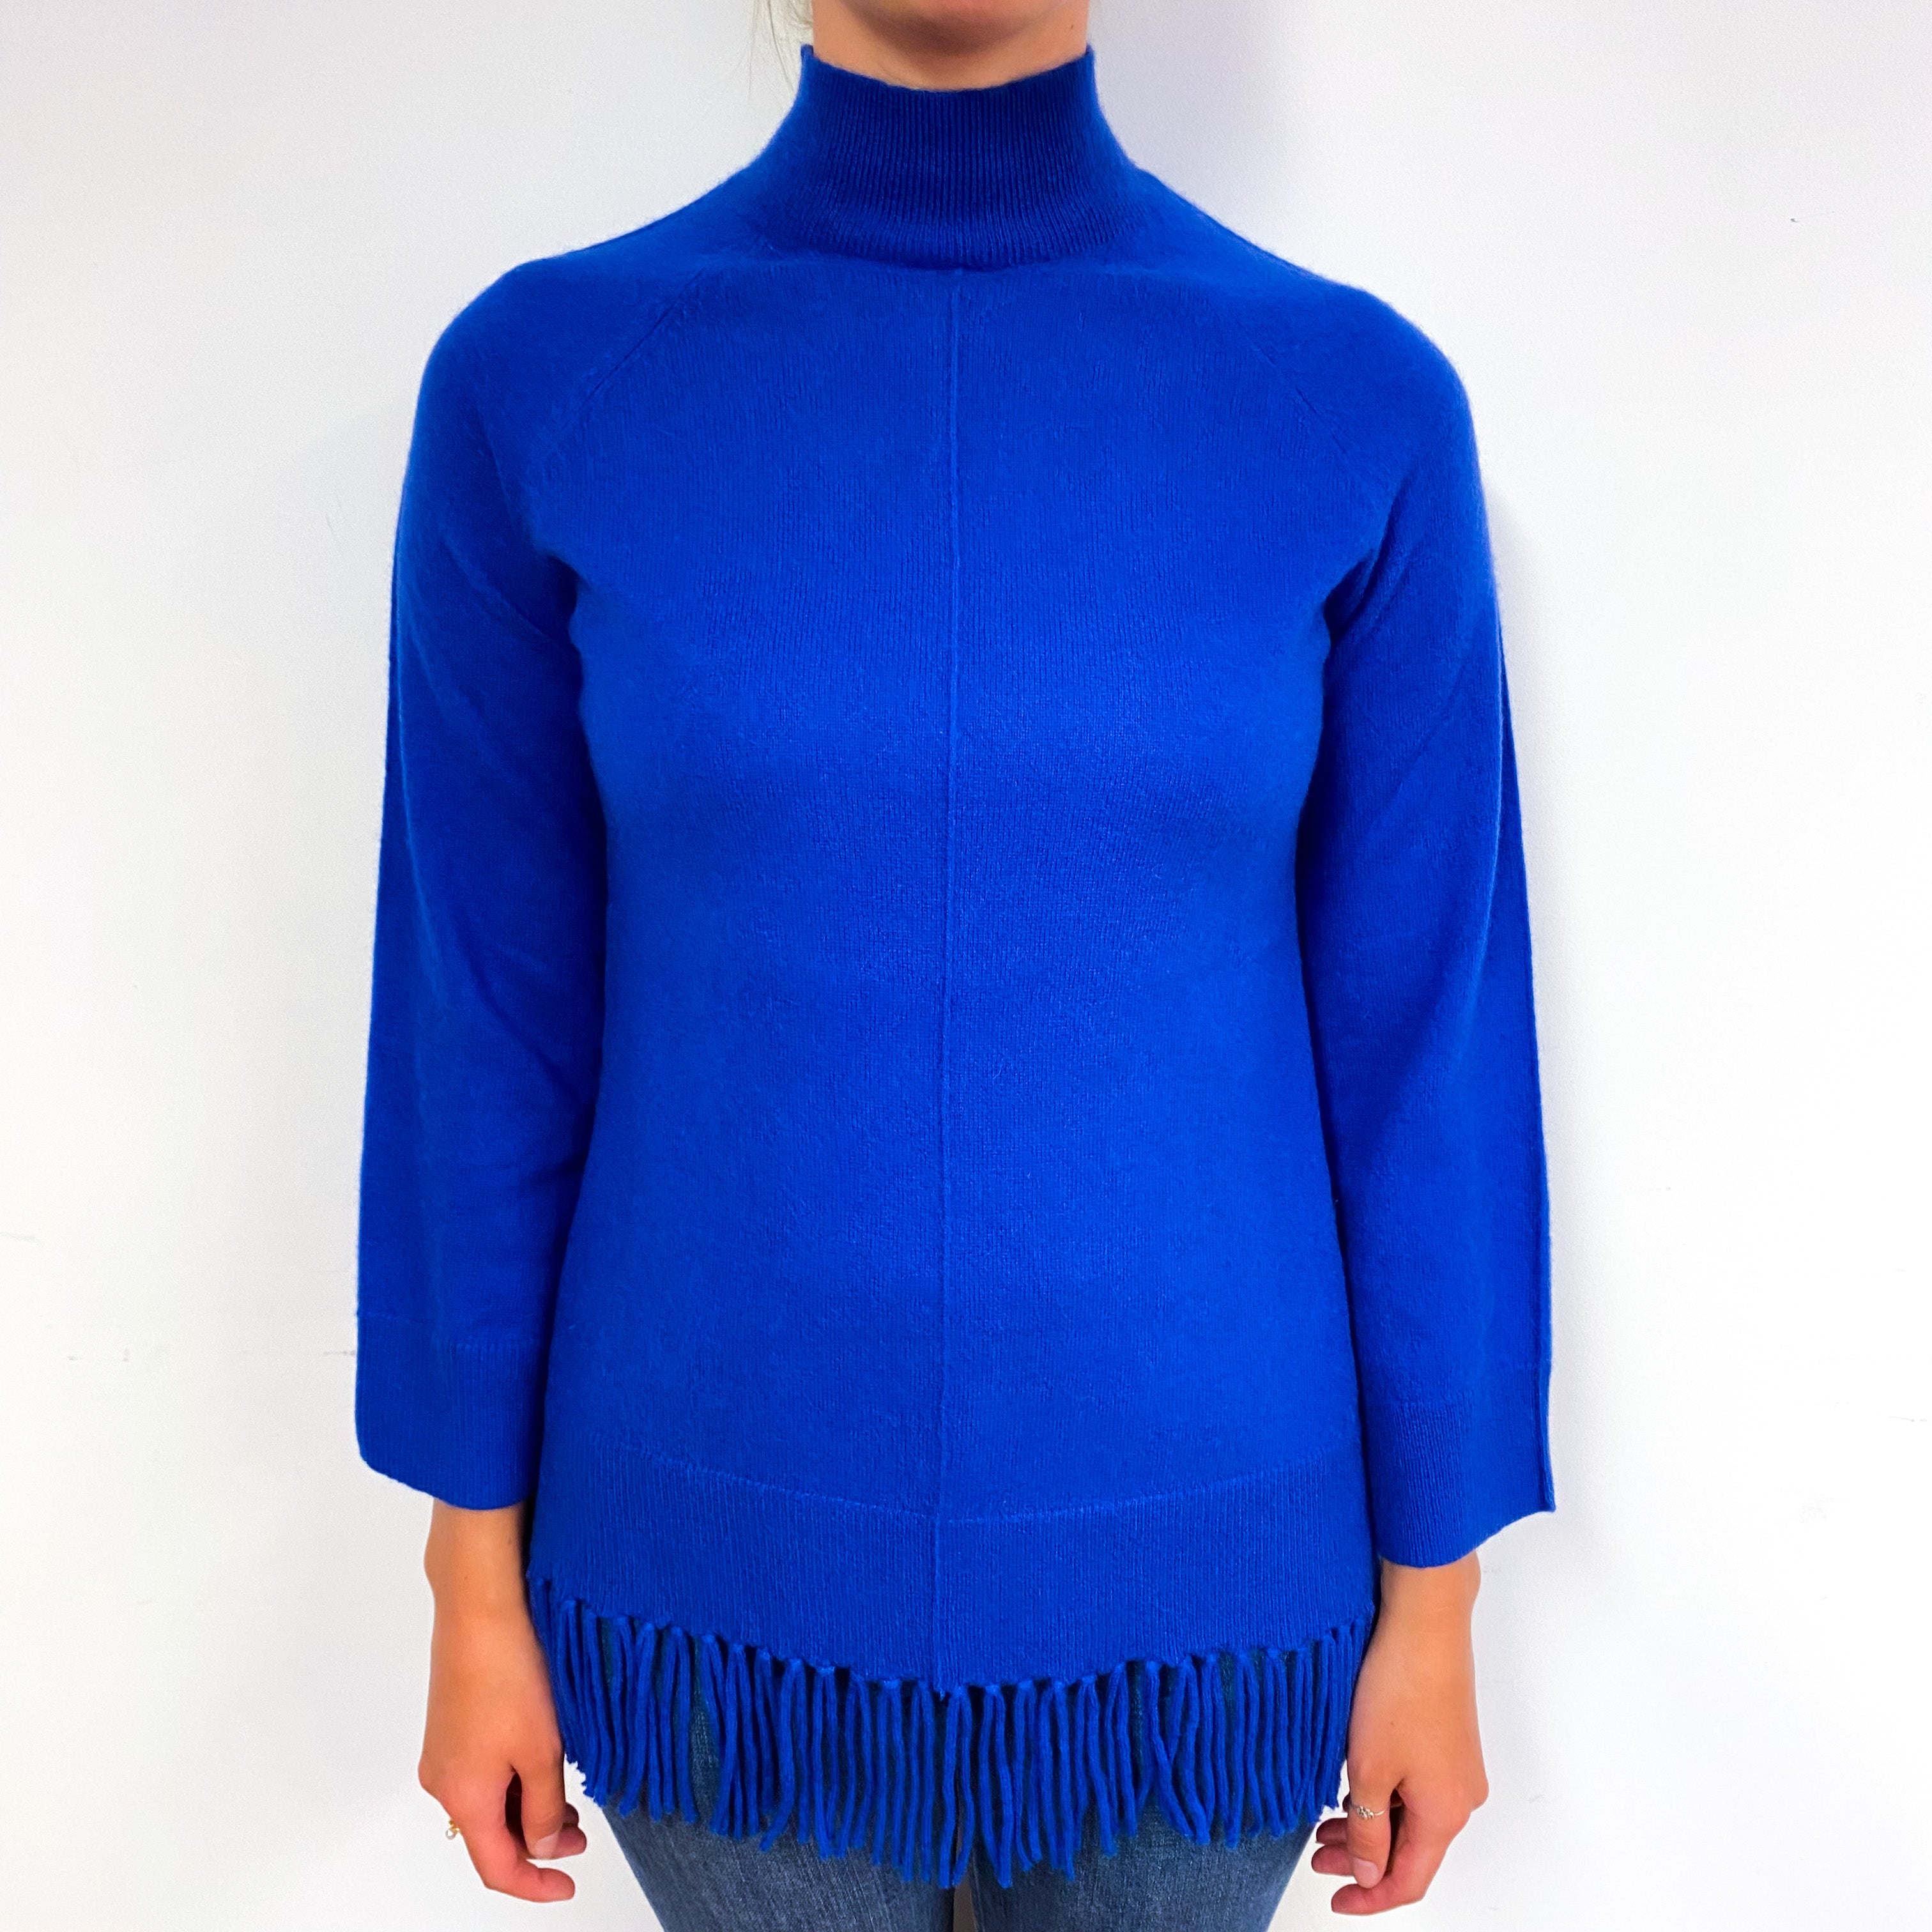 Cobalt Blue Fringed Cashmere Polo Neck Jumper Small